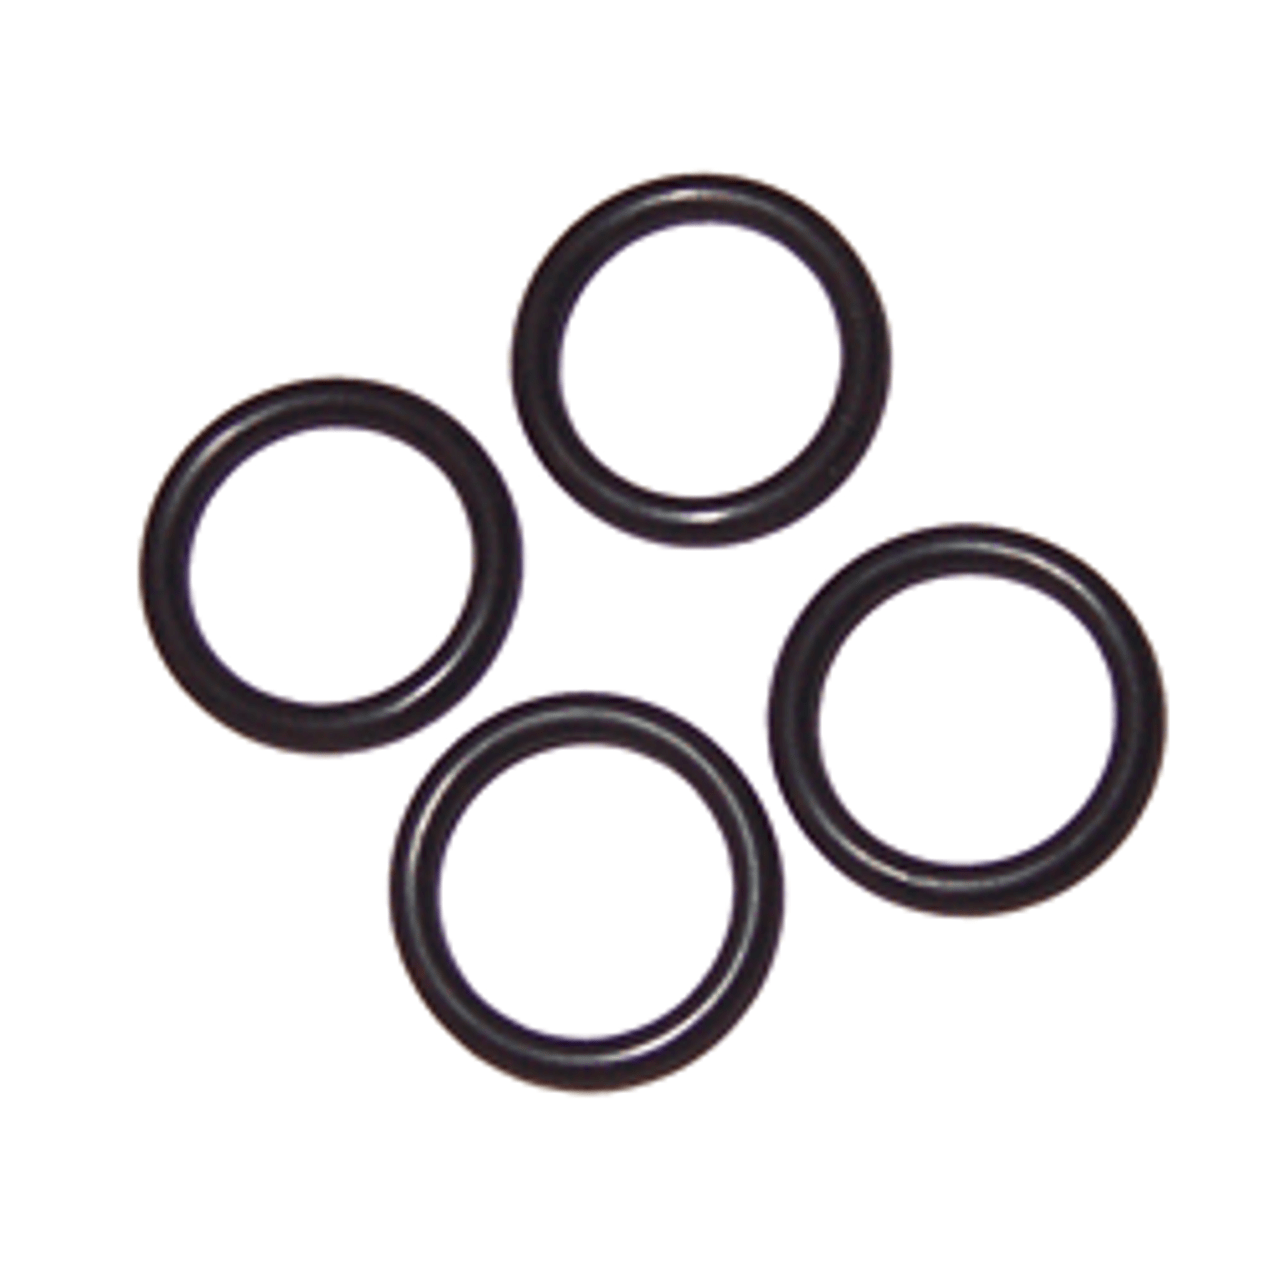 O-Rings, Powerstroke Diesel Fuel Filter Housing O-ring Seal Kit For Ford  7.3 7.3L 99-03 : Amazon.in: Car & Motorbike